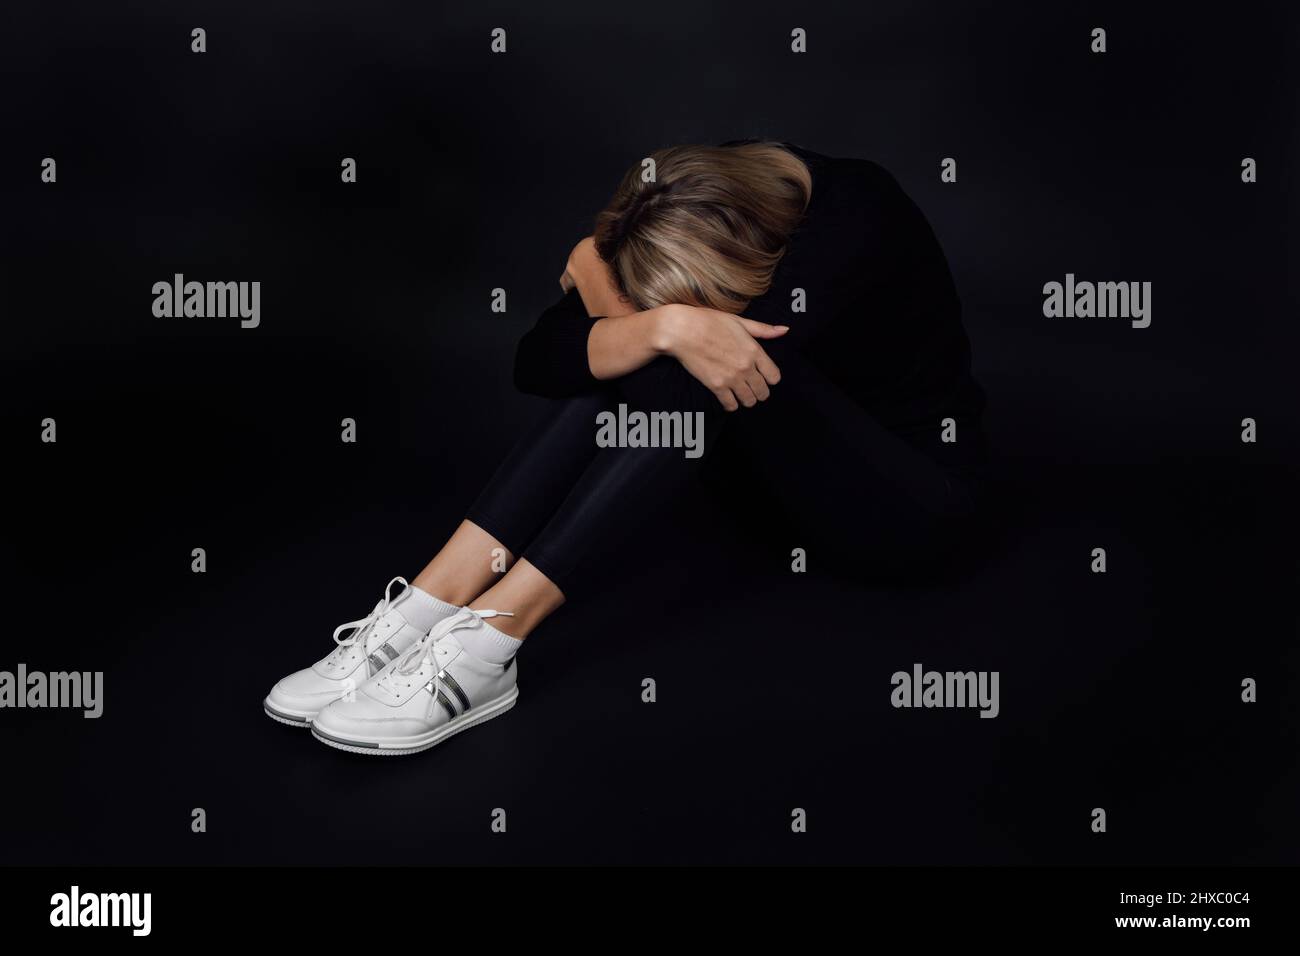 Young blonde woman in black dress going through depression with face on knees sitting on floor hiding from people on black background. Physical and Stock Photo